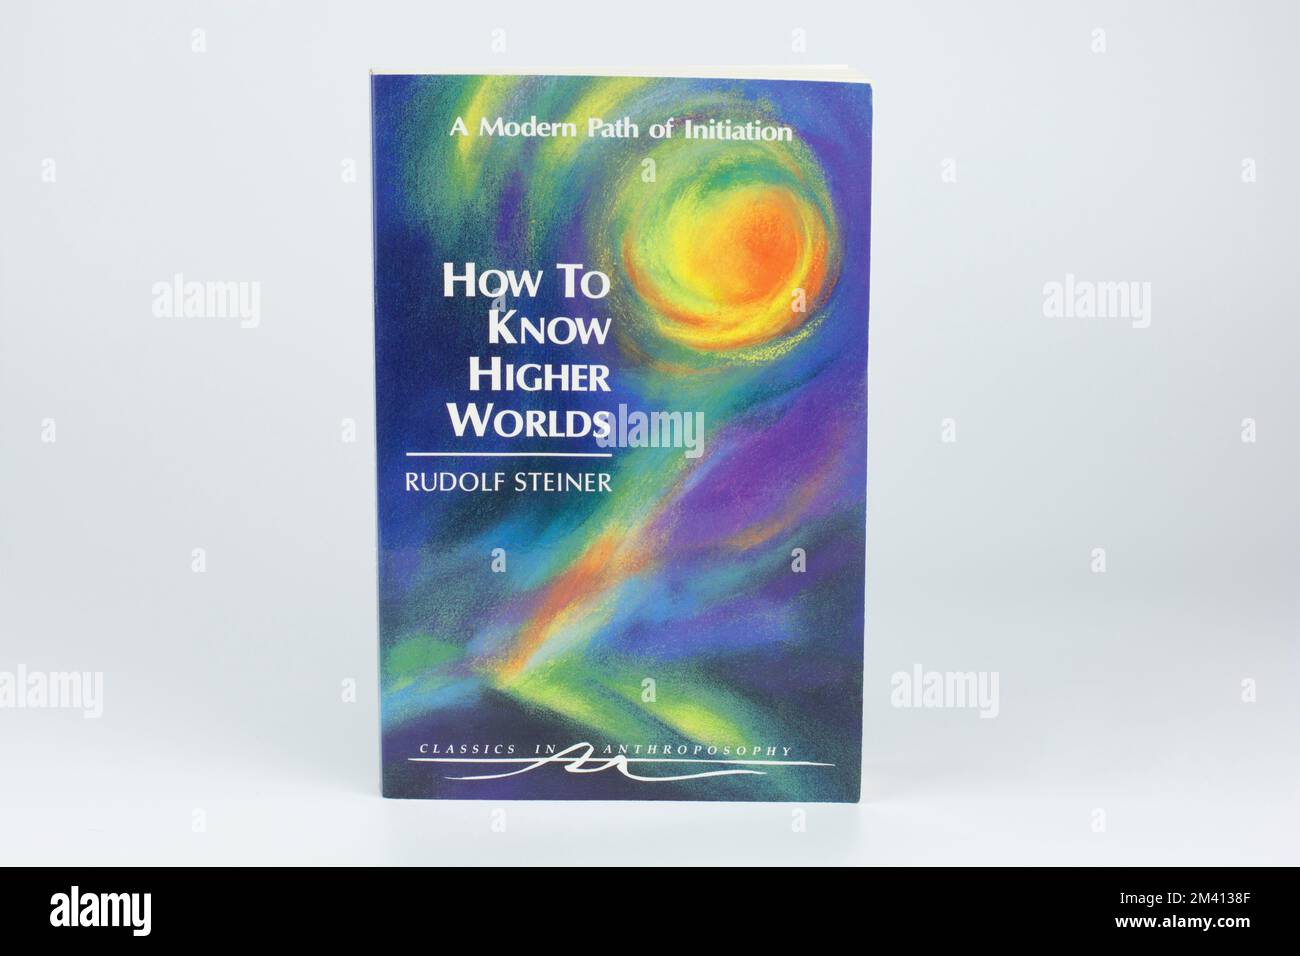 Nova Bana, Slovakia - December, 15, 2022 : Book cover of 'How to know higher worlds' written by Rudolf Steiner. Stock Photo